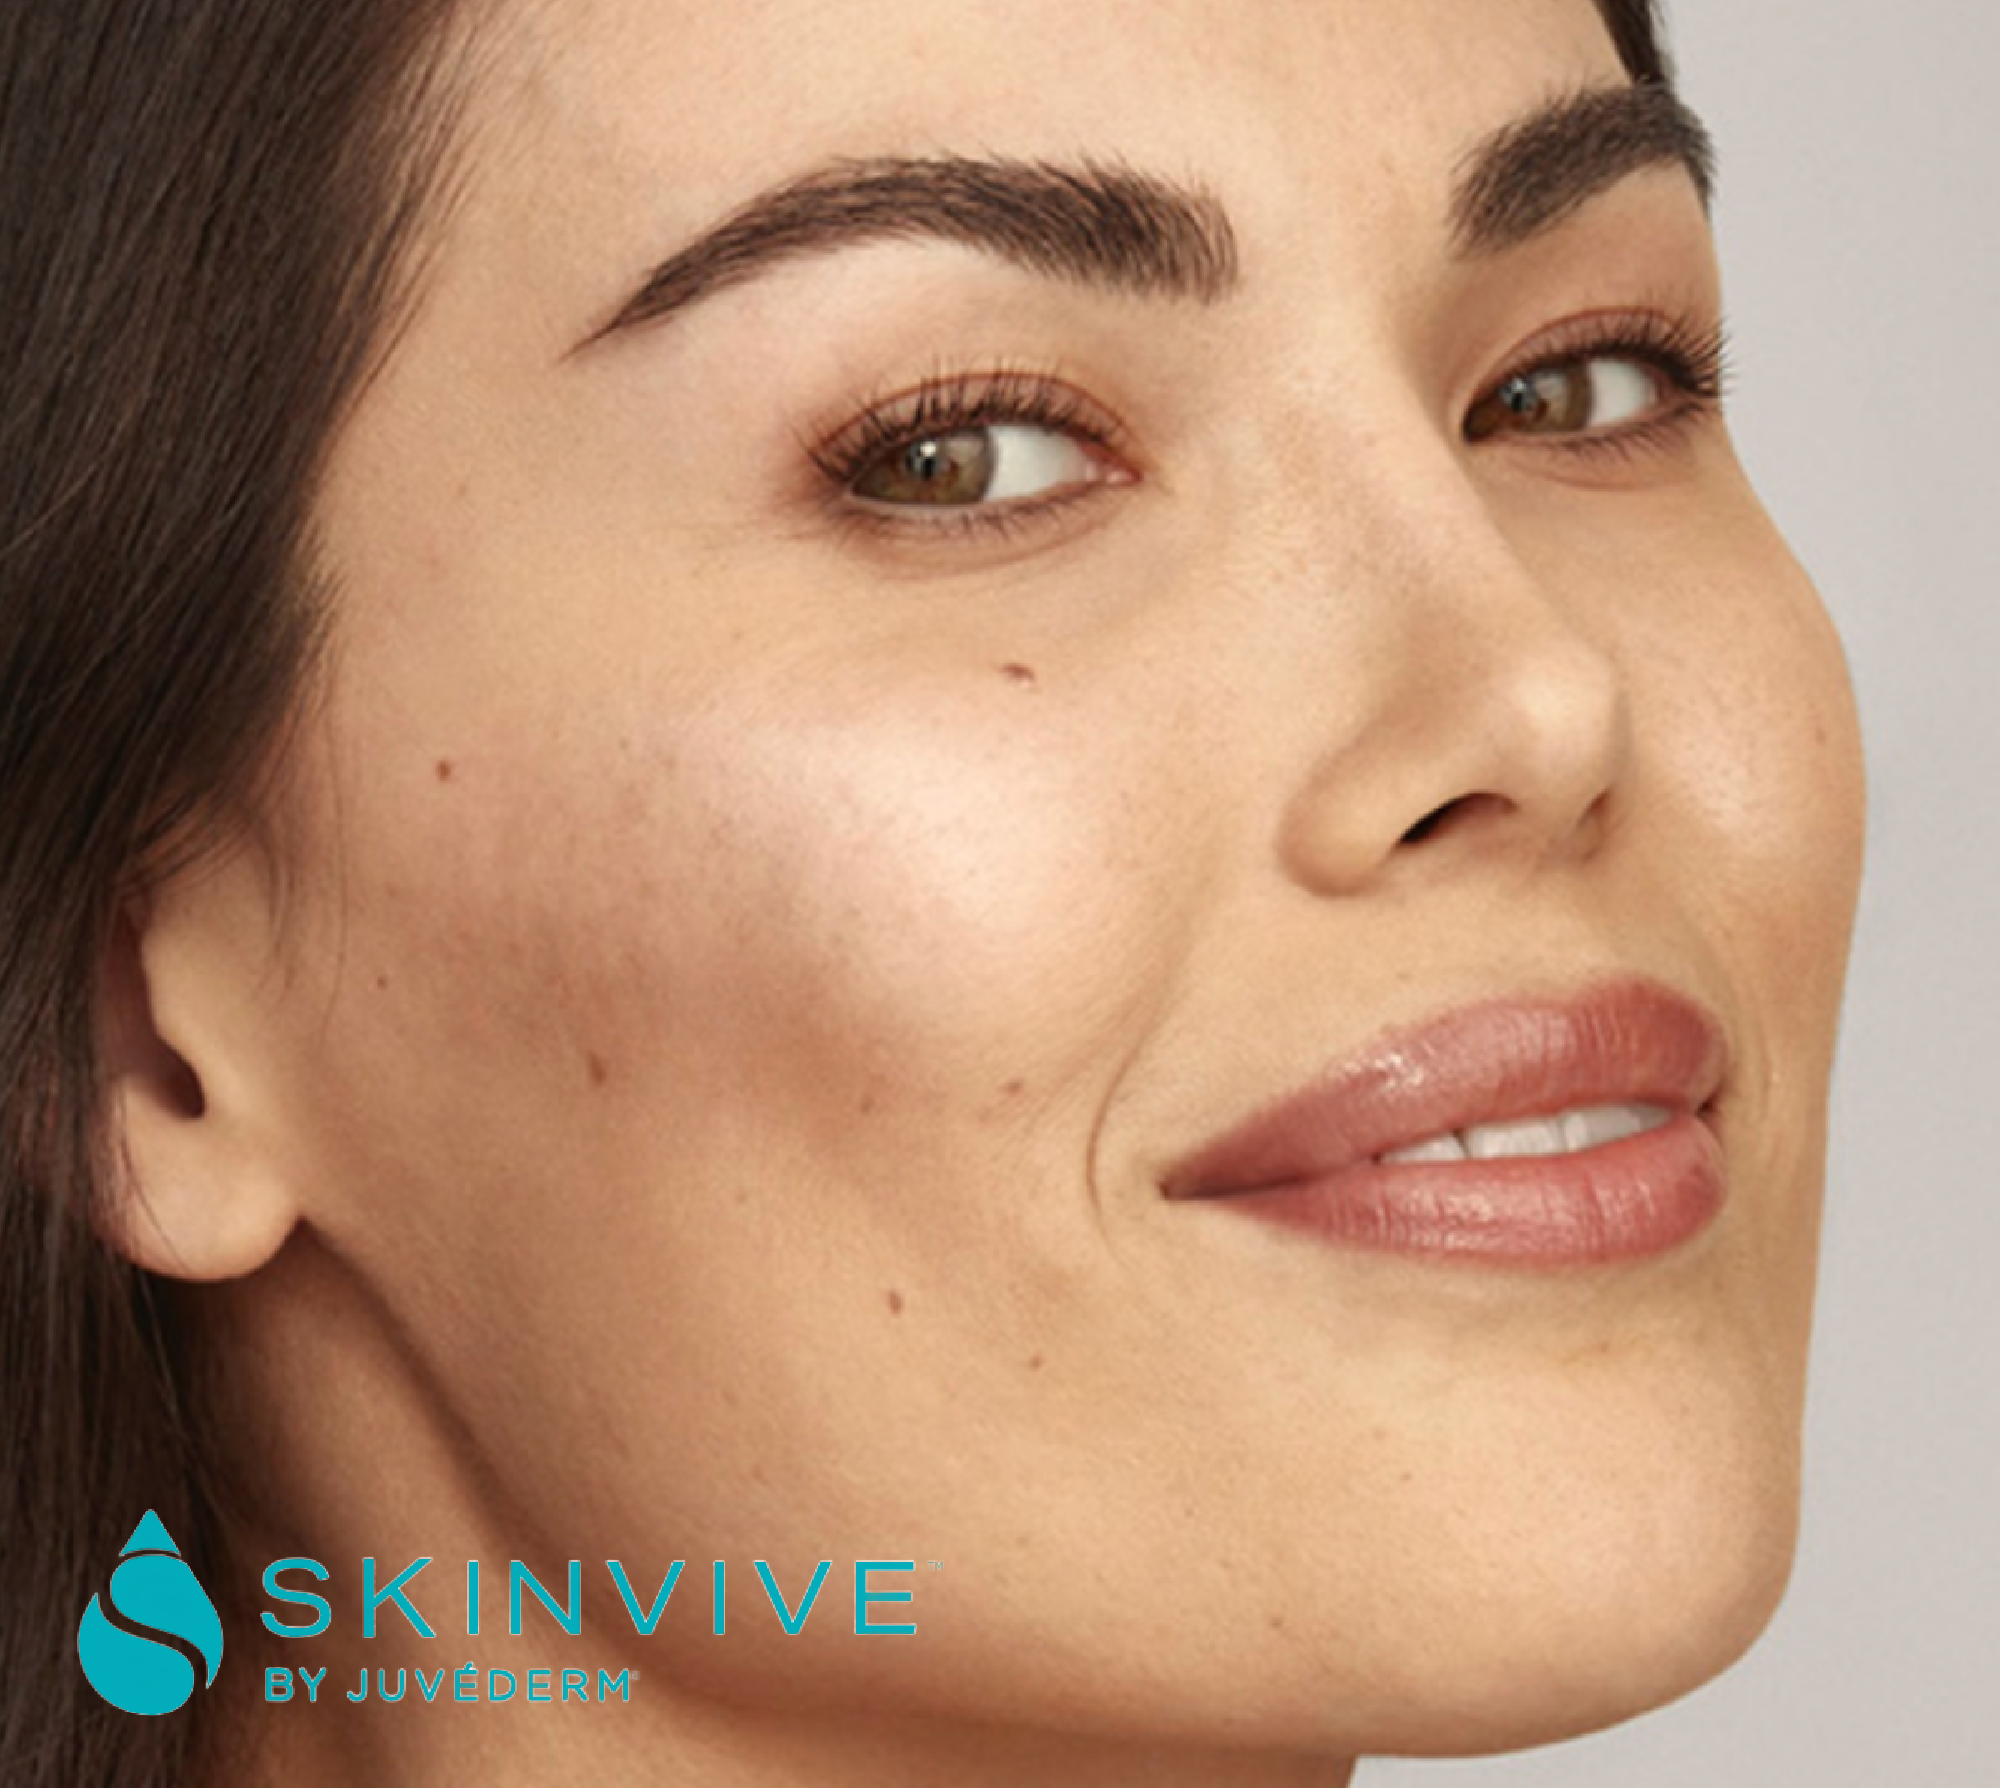 SkinVive: The Latest Innovation Featuring Hyaluronic Acid